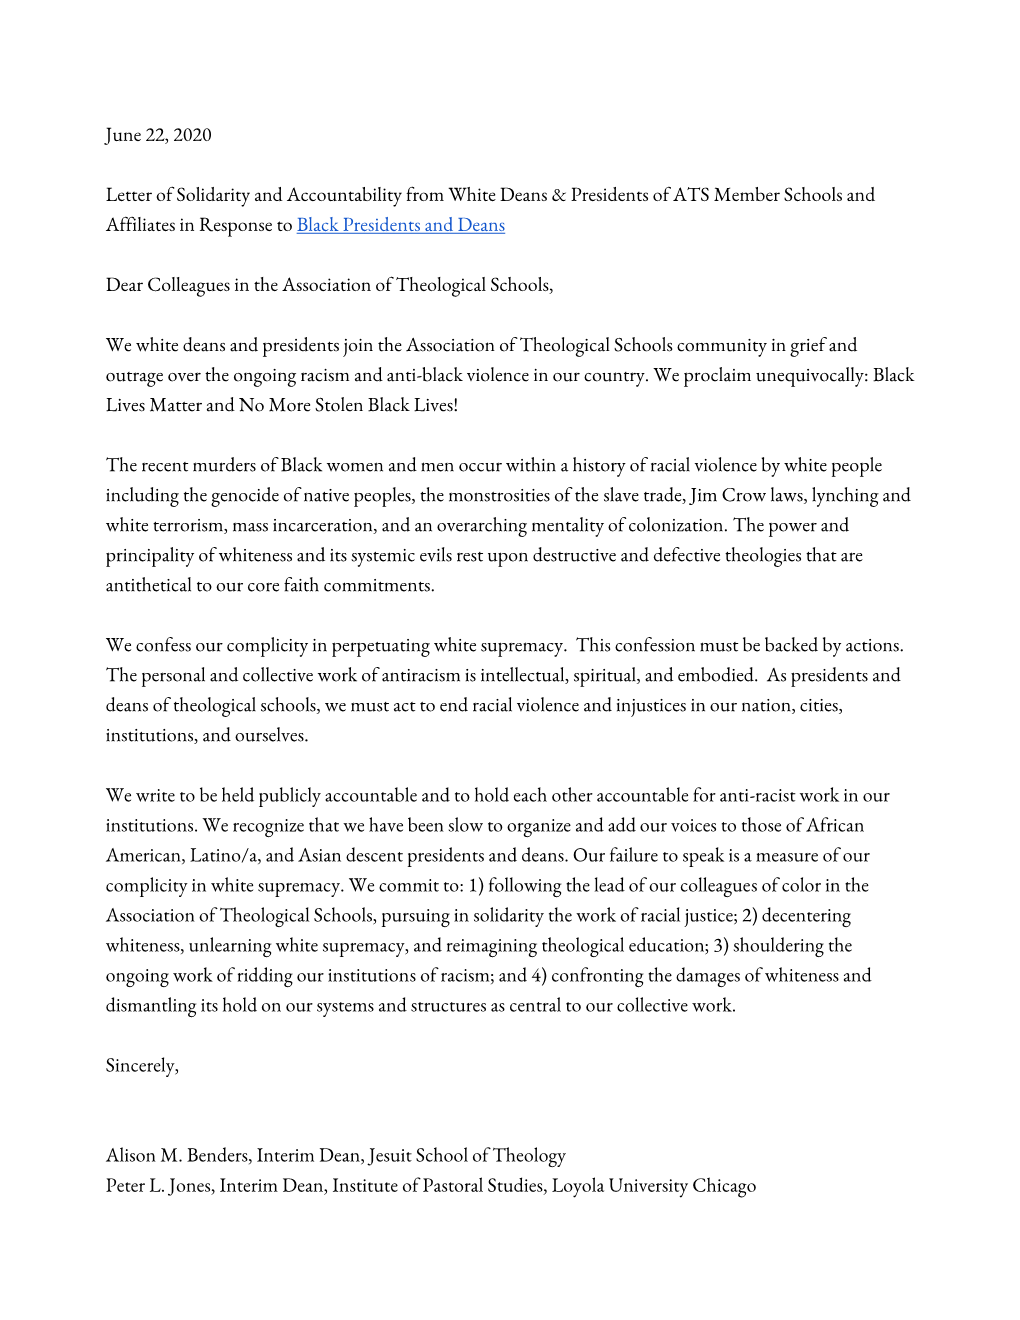 June 22, 2020 Letter of Solidarity and Accountability from White Deans